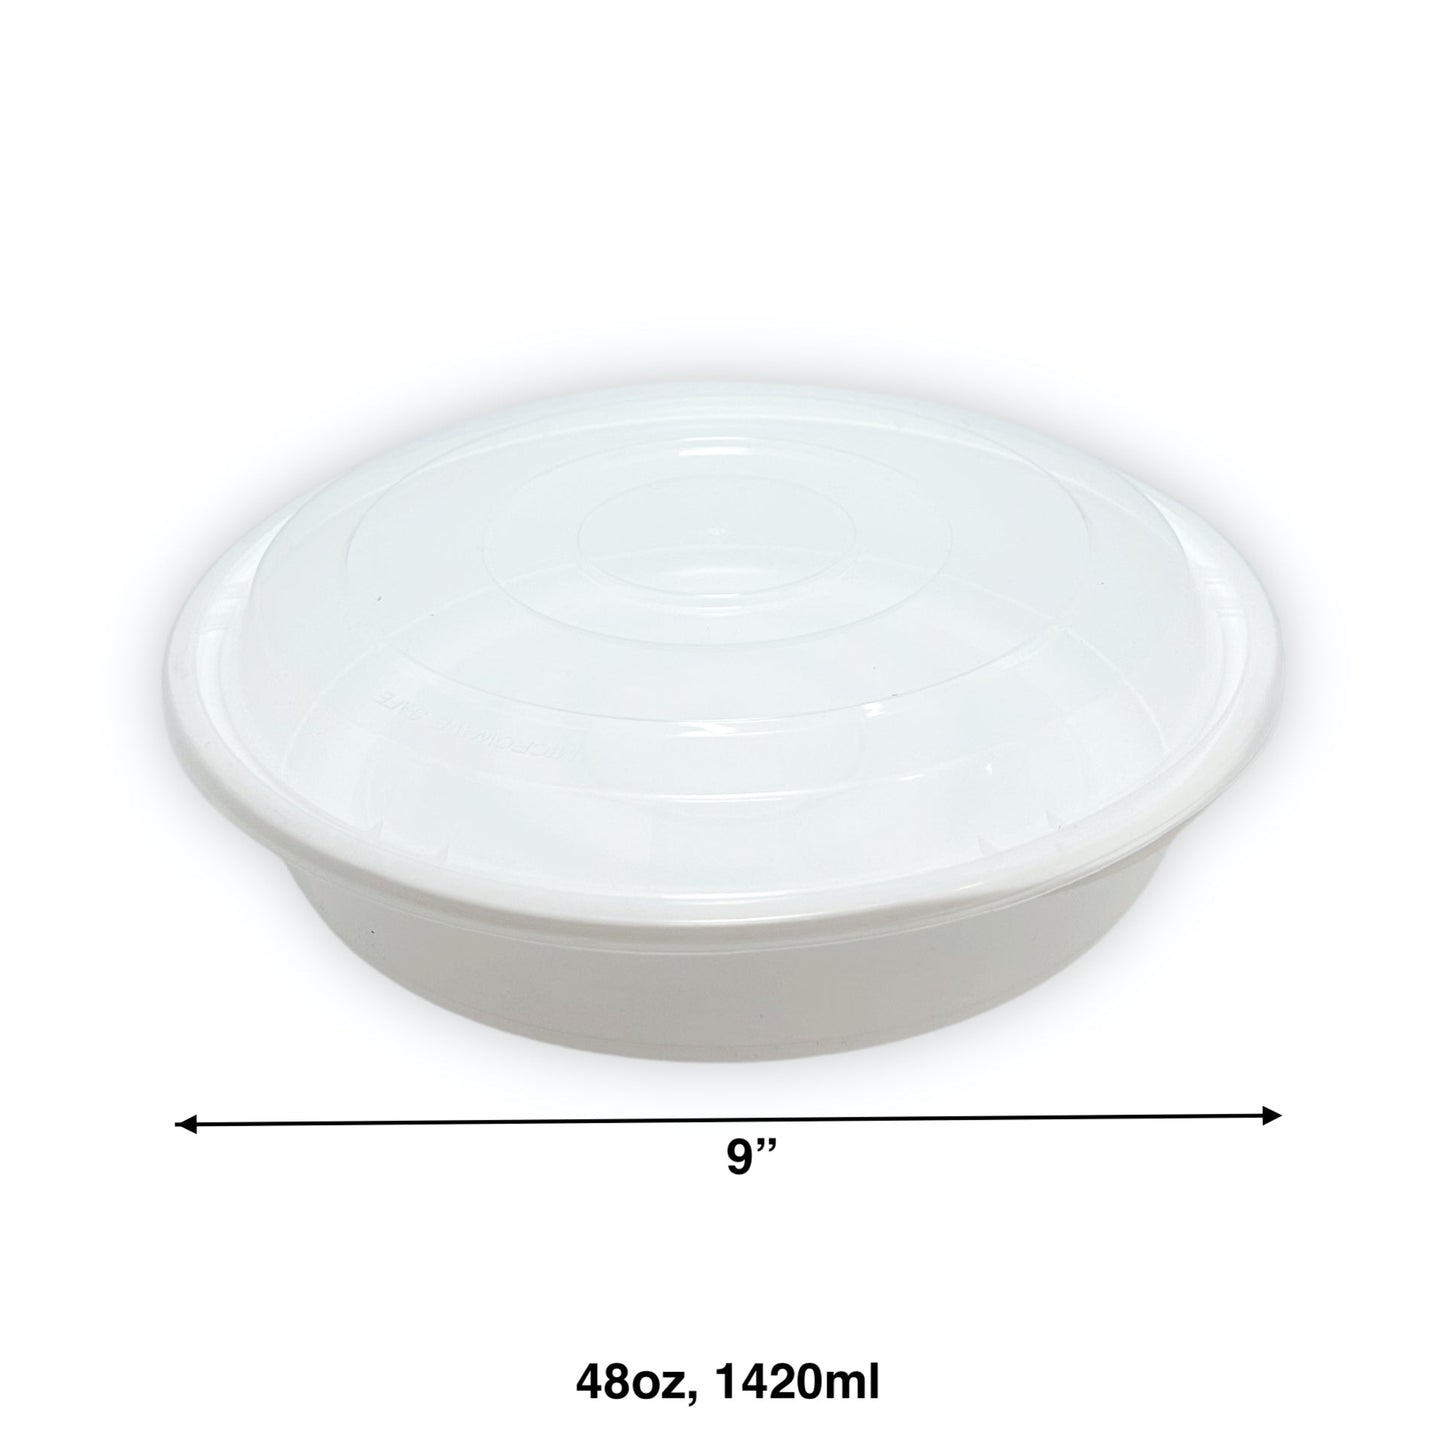 KIS-R48G | 150sets 48oz, 1420ml White PP Round 9" Container with Clear Lids Combo; $0.29/set